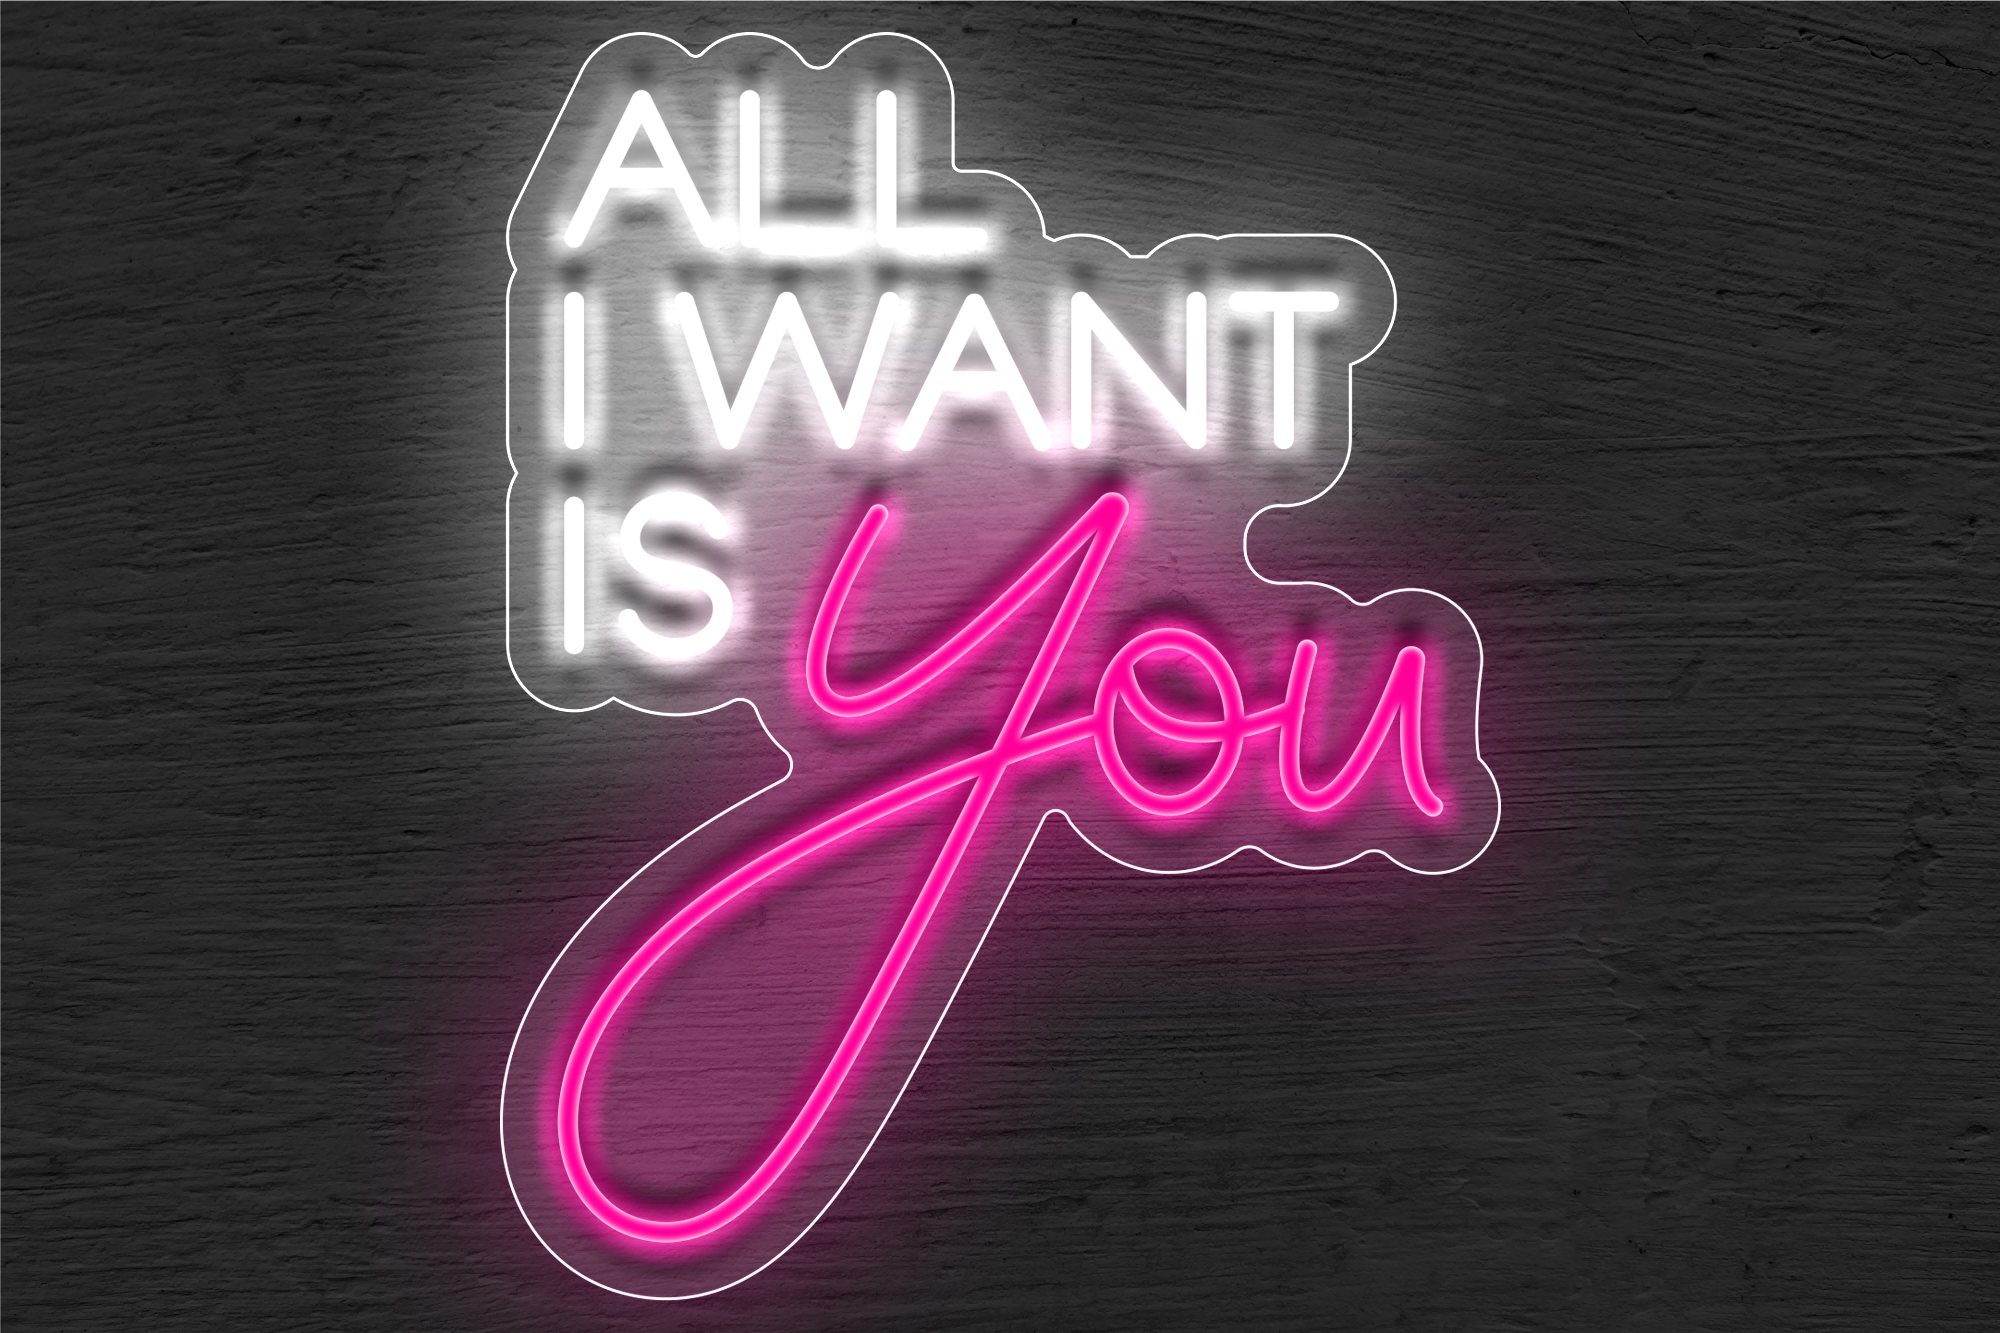 "All I want is You" LED Neon Sign